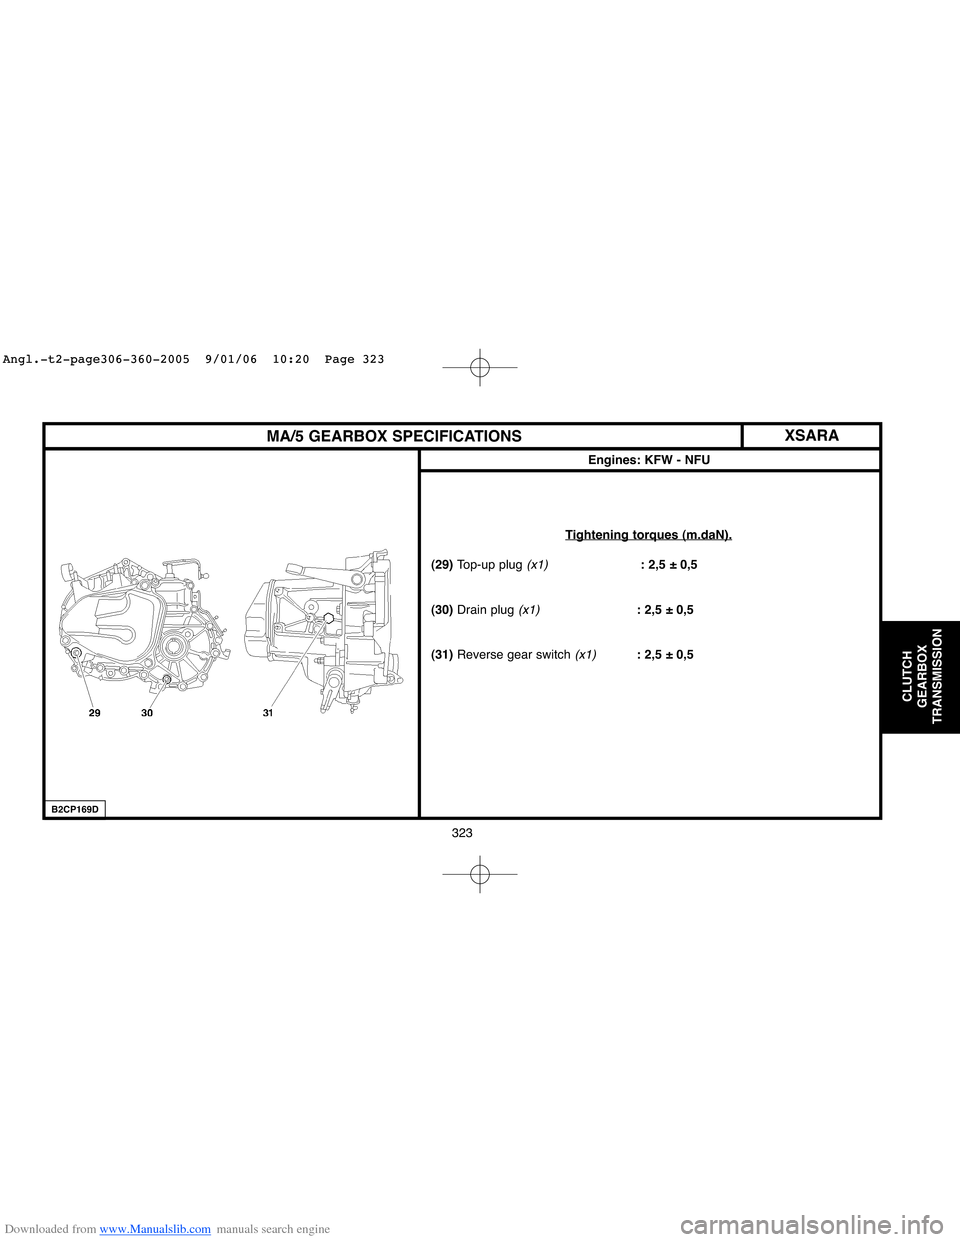 Citroen C4 2005 2.G Service Manual Downloaded from www.Manualslib.com manuals search engine 323
CLUTCH
GEARBOX
TRANSMISSION
MA/5 GEARBOX SPECIFICATIONS
Engines: KFW - NFU
Tightening torques (m.daN).
(29) Top-up plug (x1): 2,5 ± 0,5
(3